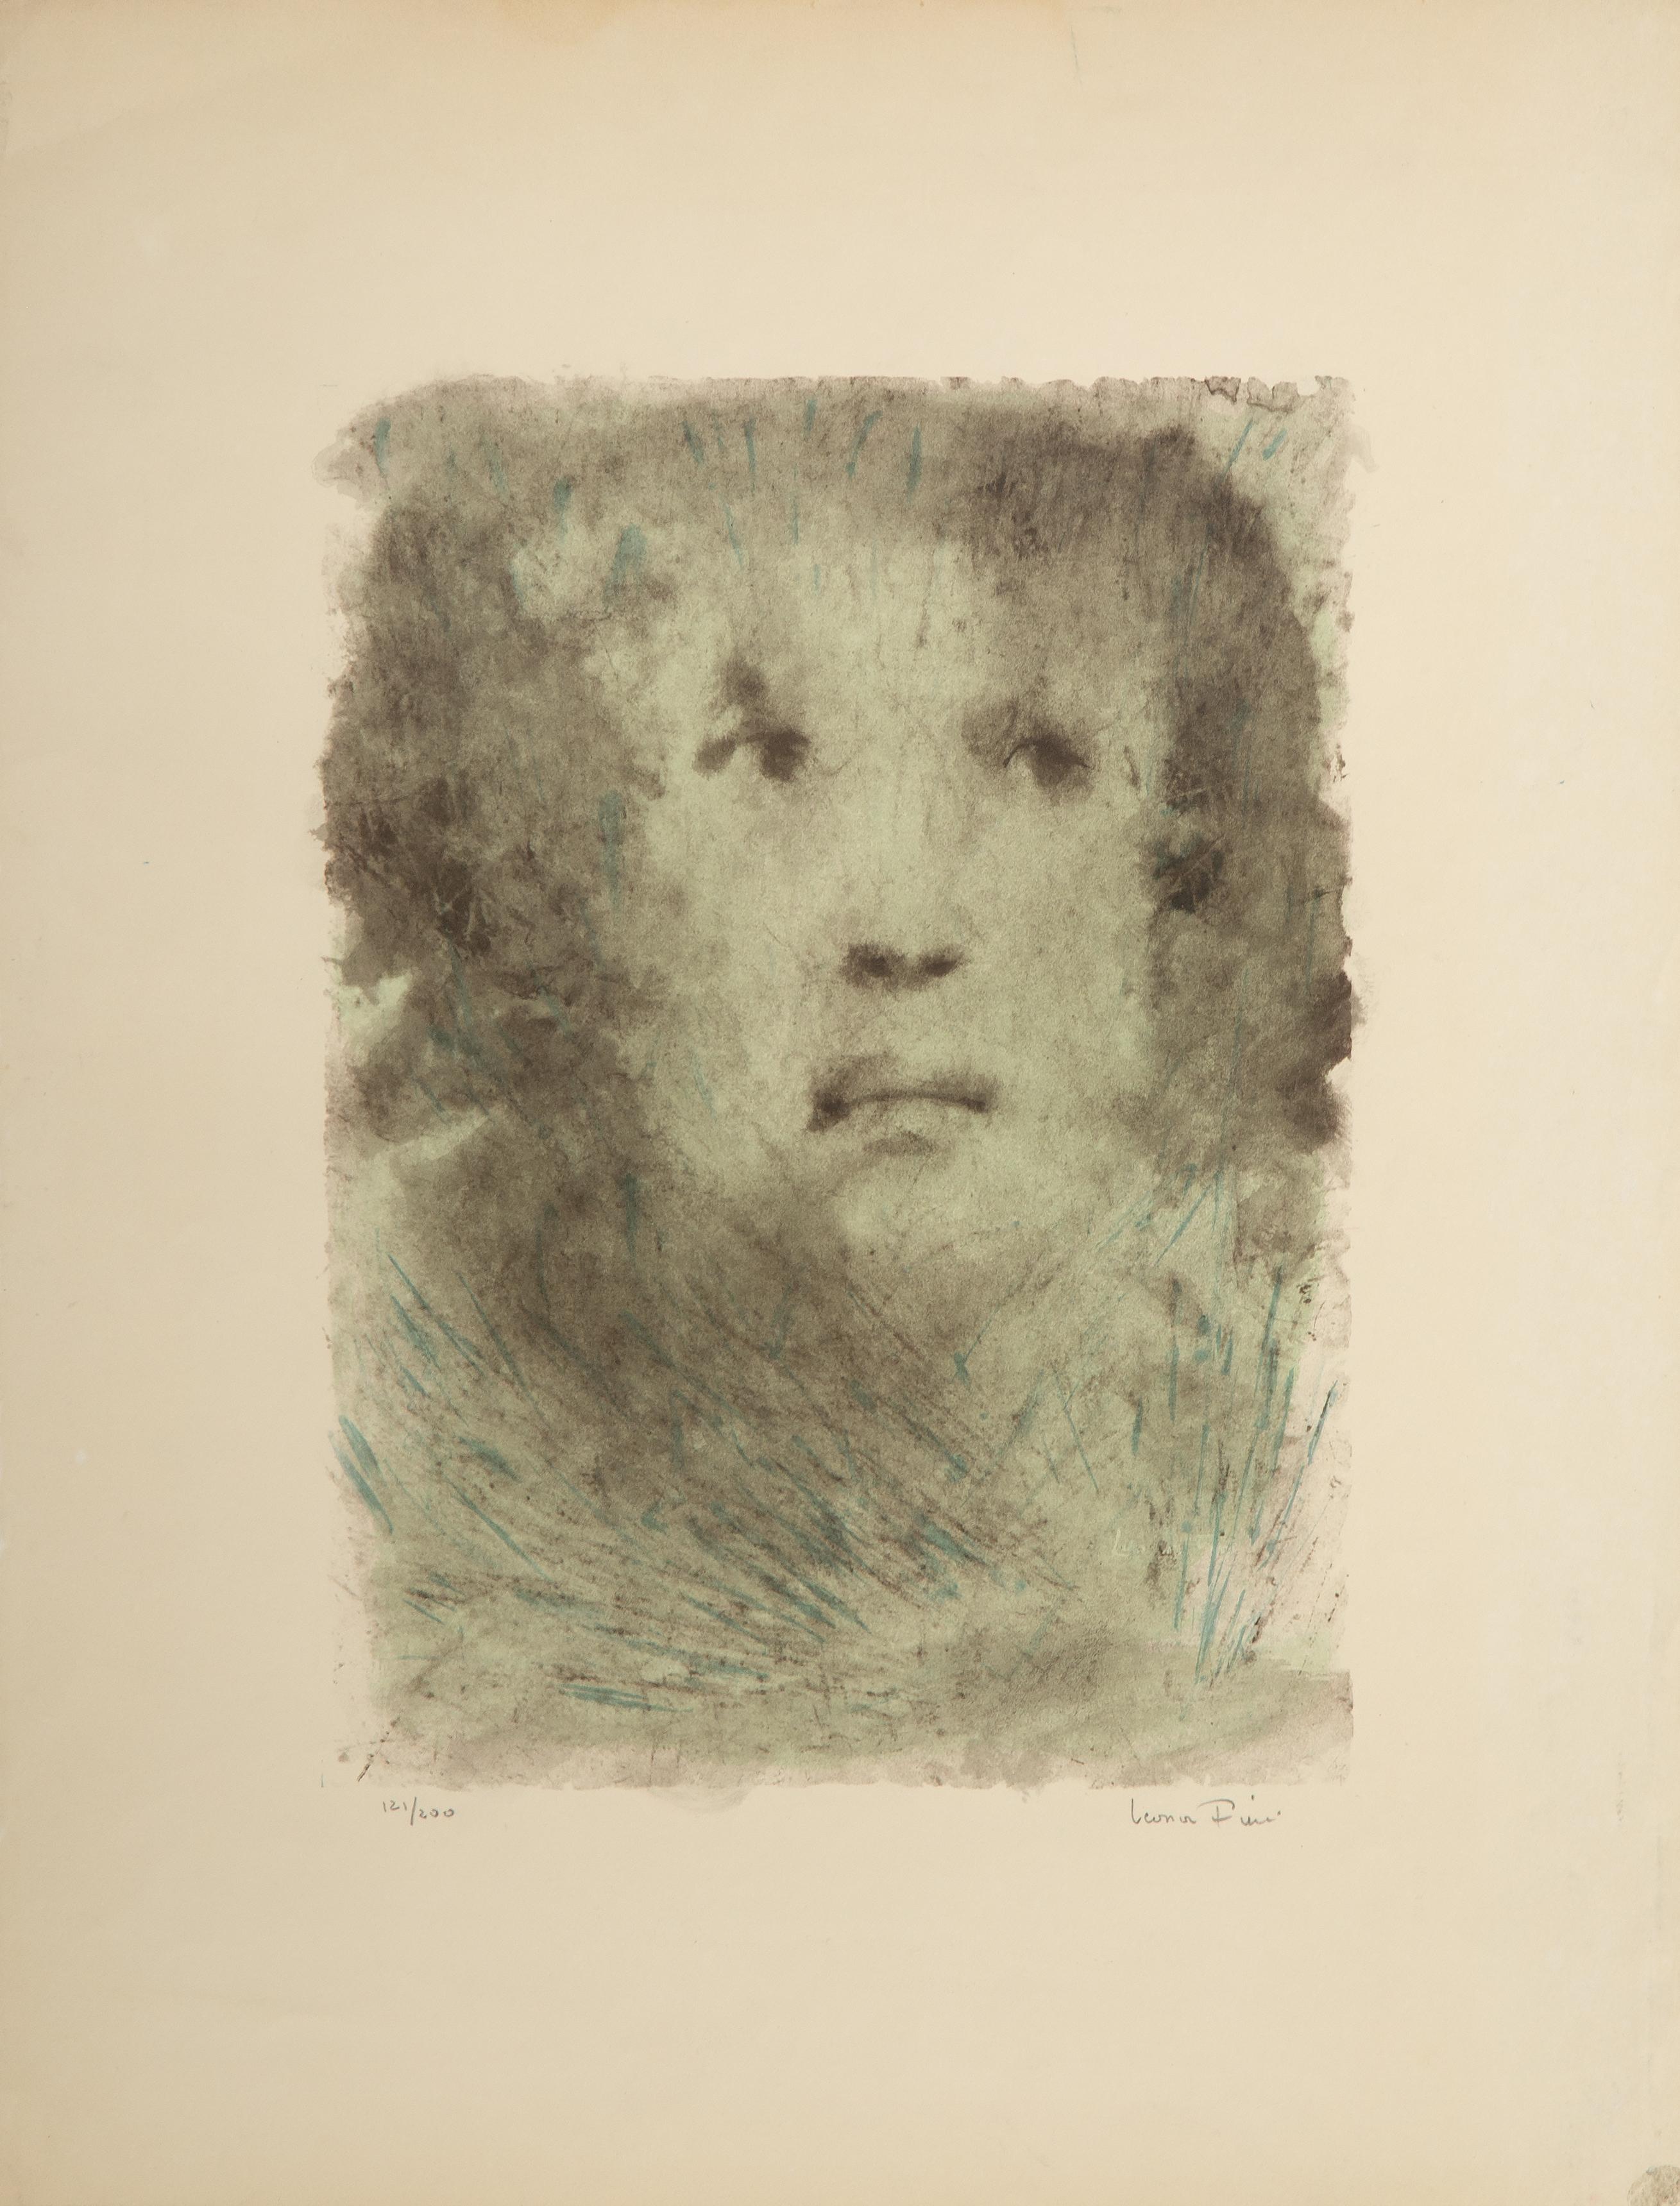 Portrait of a Child
Leonor Fini, Argentine/French (1918–1996)
Lithograph, signed and numbered in pencil
Edition of 200
Image Size: 16.5 x 12 inches
Size: 24.5 x 19 in. (62.23 x 48.26 cm)